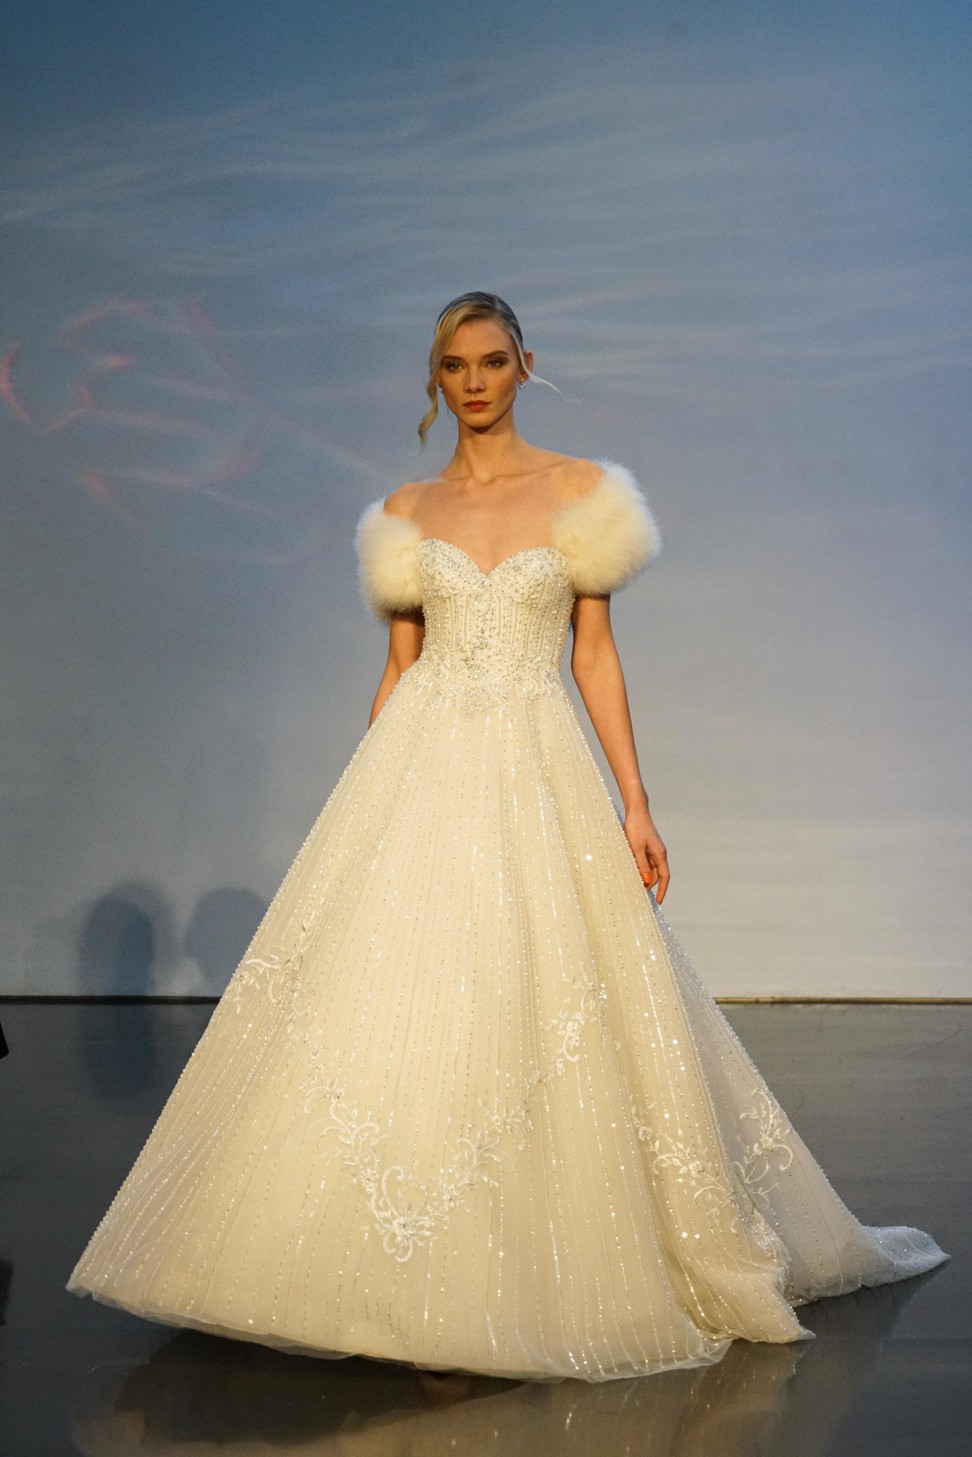 A model presents a fancy creation from Justin Alexander during the New York Bridal Fashion Week. Photo: Xinhua